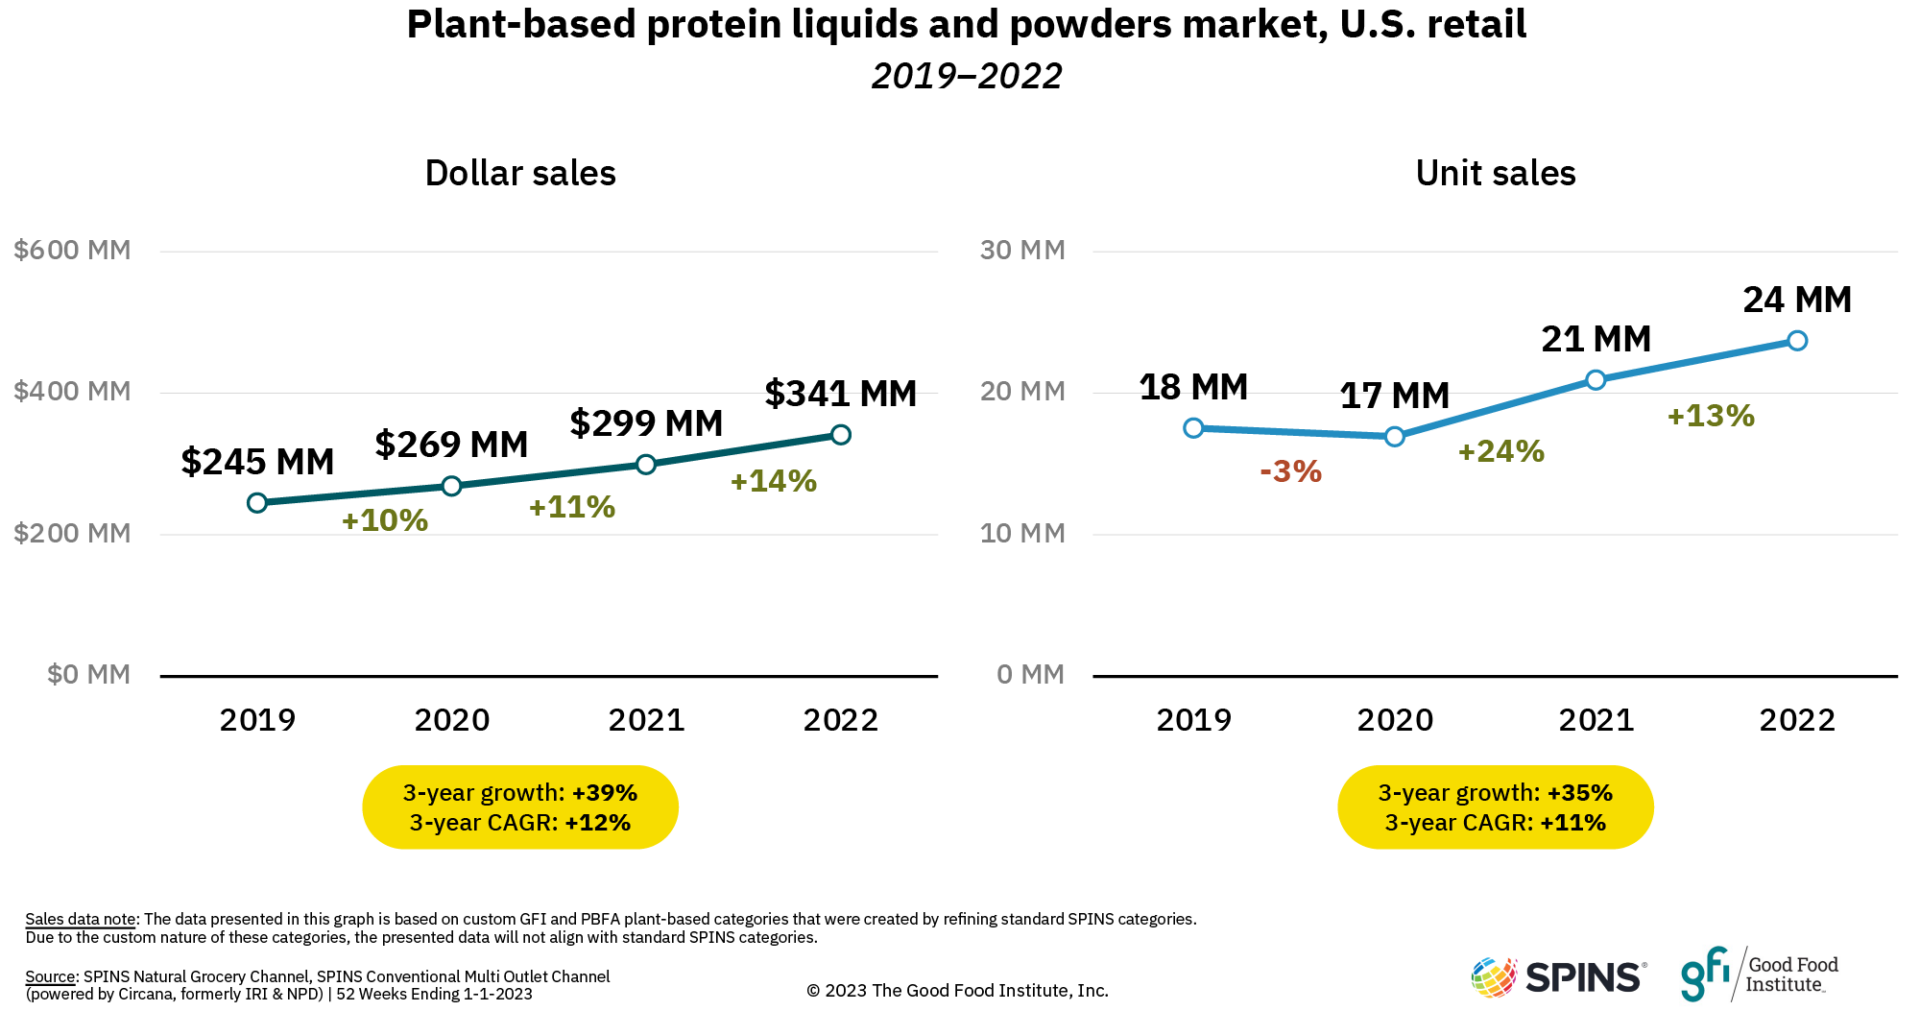 Summary of plant-based protein liquids and powders sales data